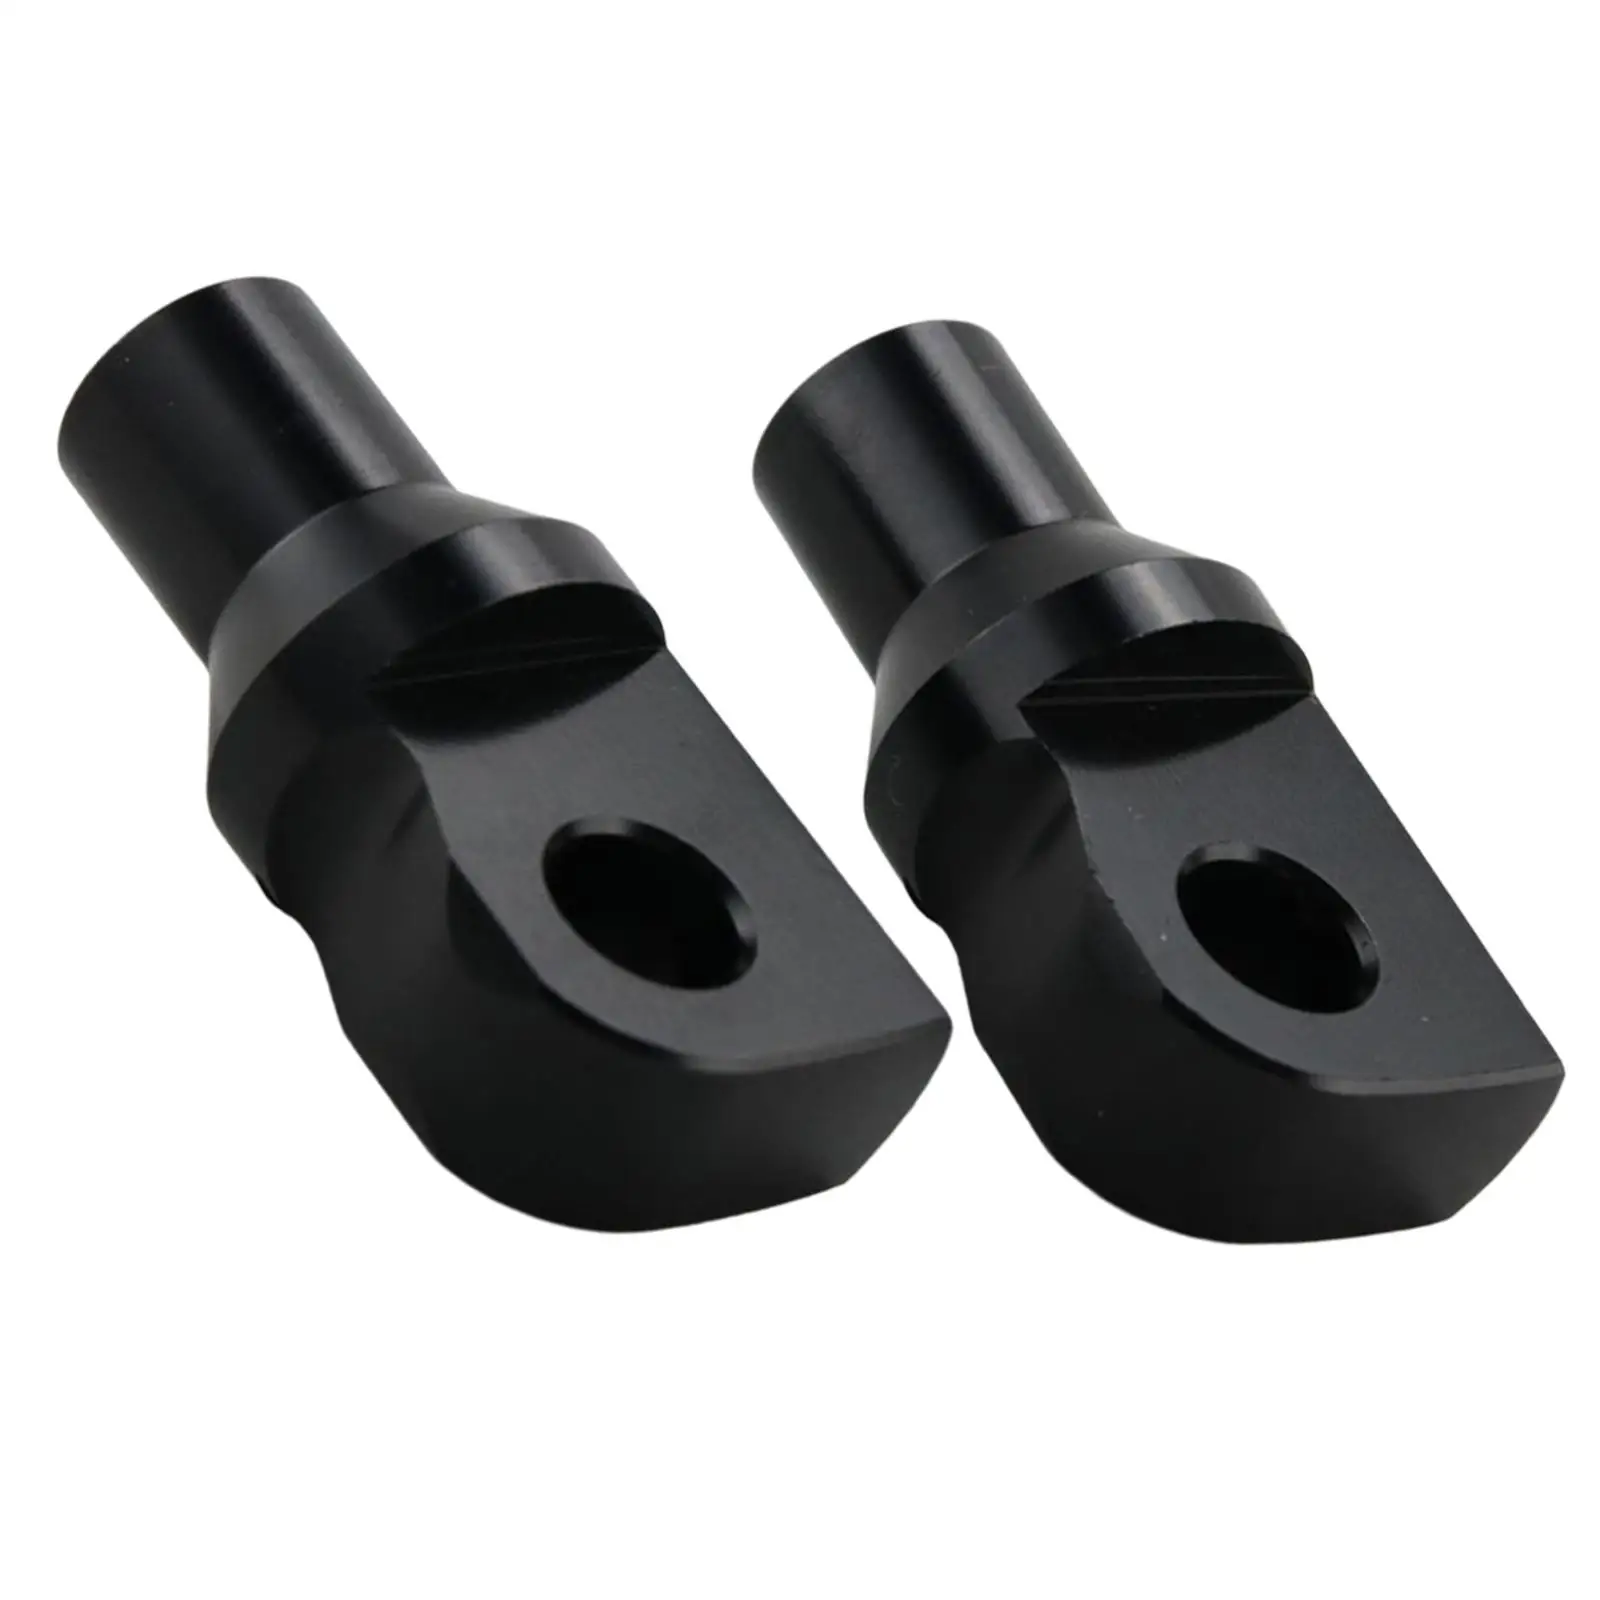 2 Pieces Motorcycle Footpeg Mounting Bolt Adapter for Heritage Fxdwg Male Pegs Mounting